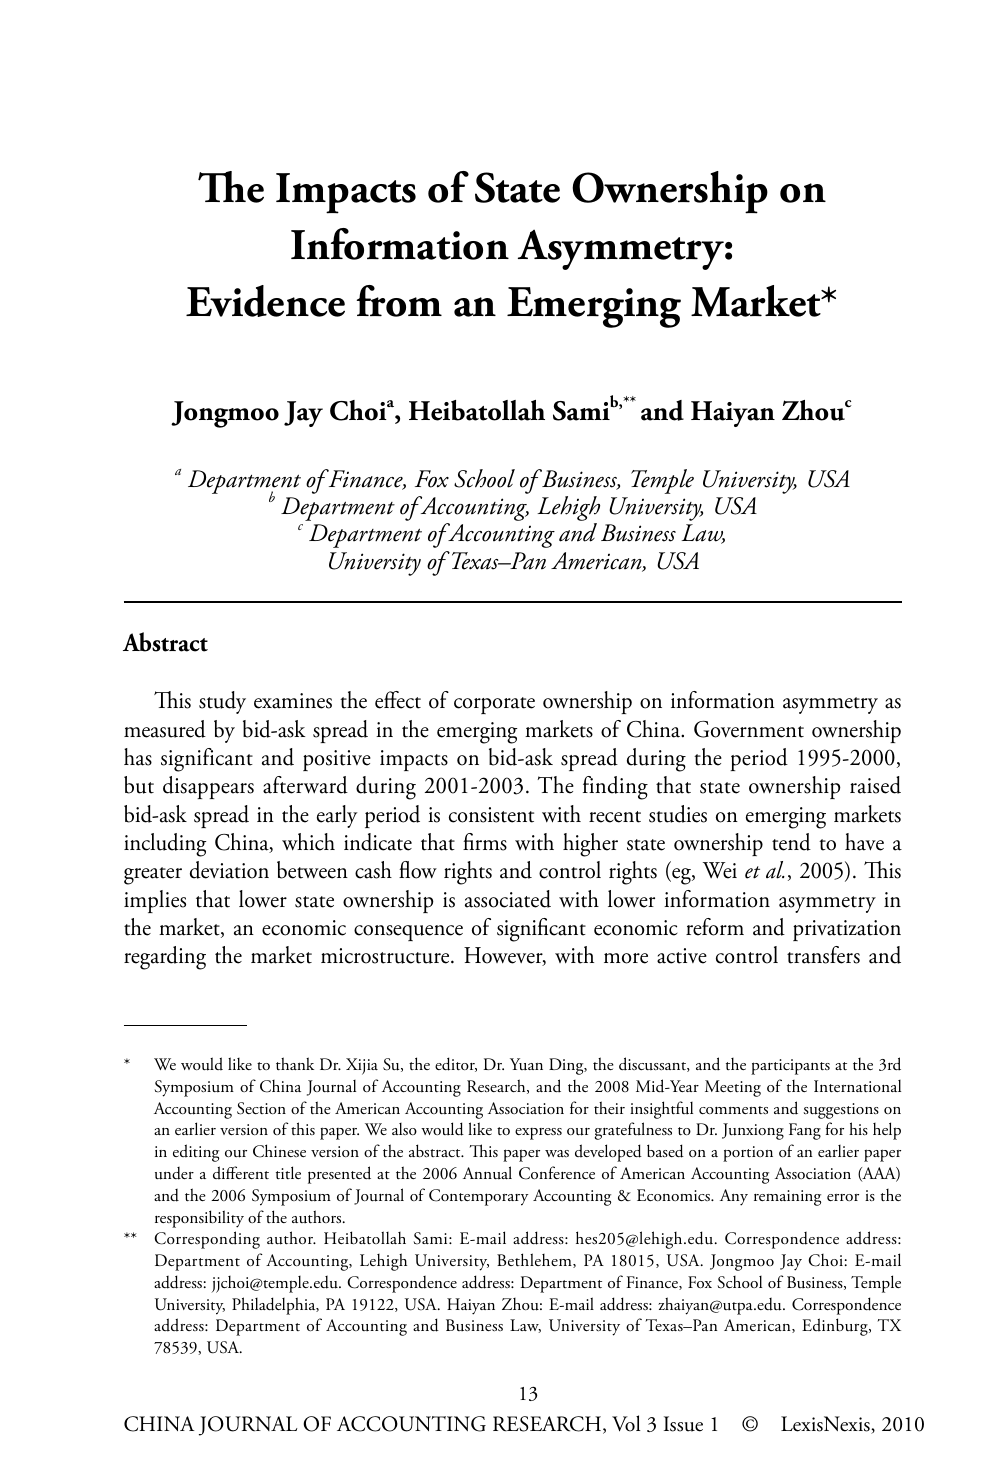 The Impacts Of State Ownership On Information Asymmetry Evidence From An Emerging Market Topic Of Research Paper In Economics And Business Download Scholarly Article Pdf And Read For Free On Cyberleninka